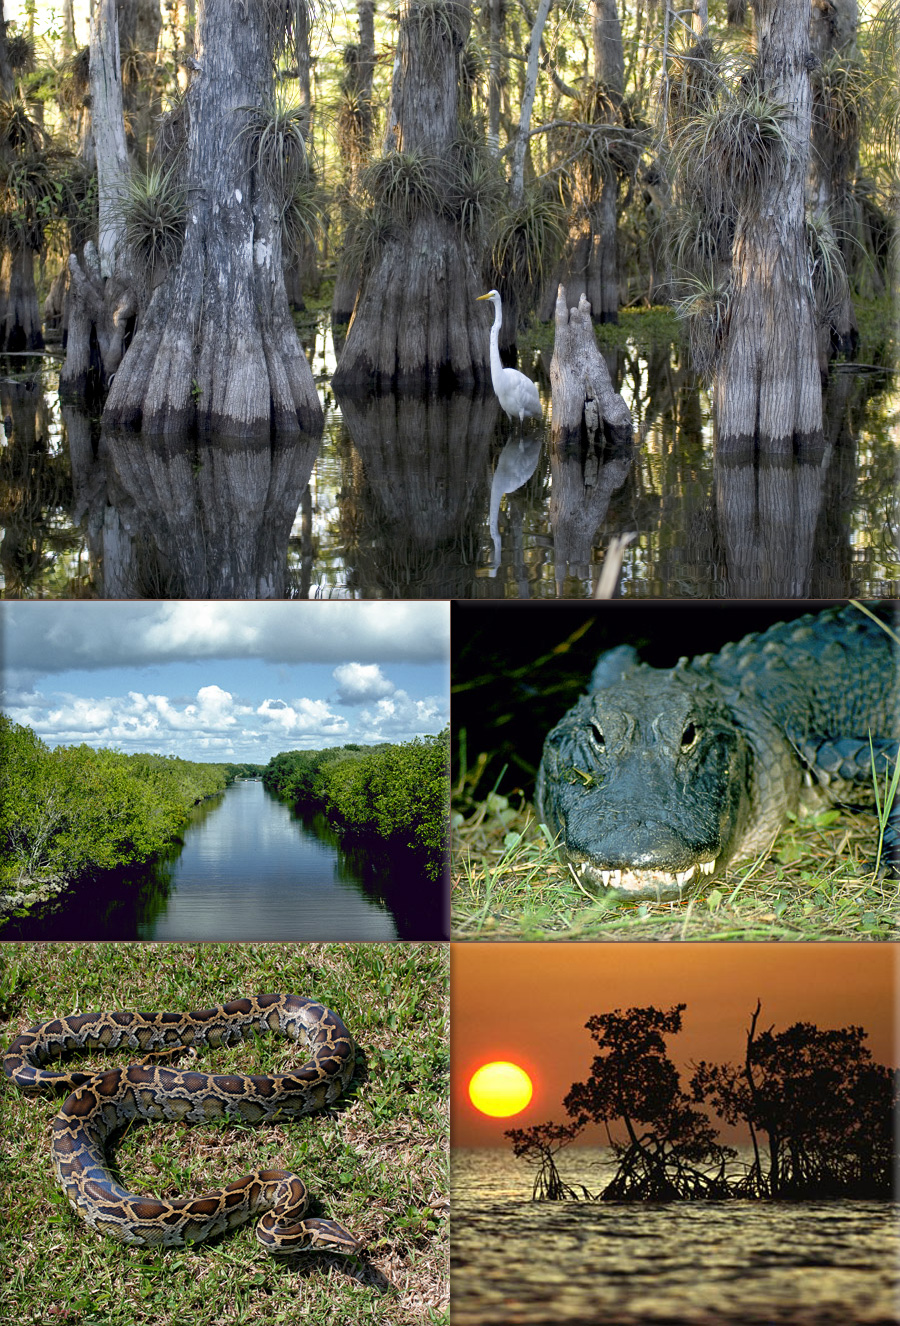 The Everglades National Park in Florida is dedicated